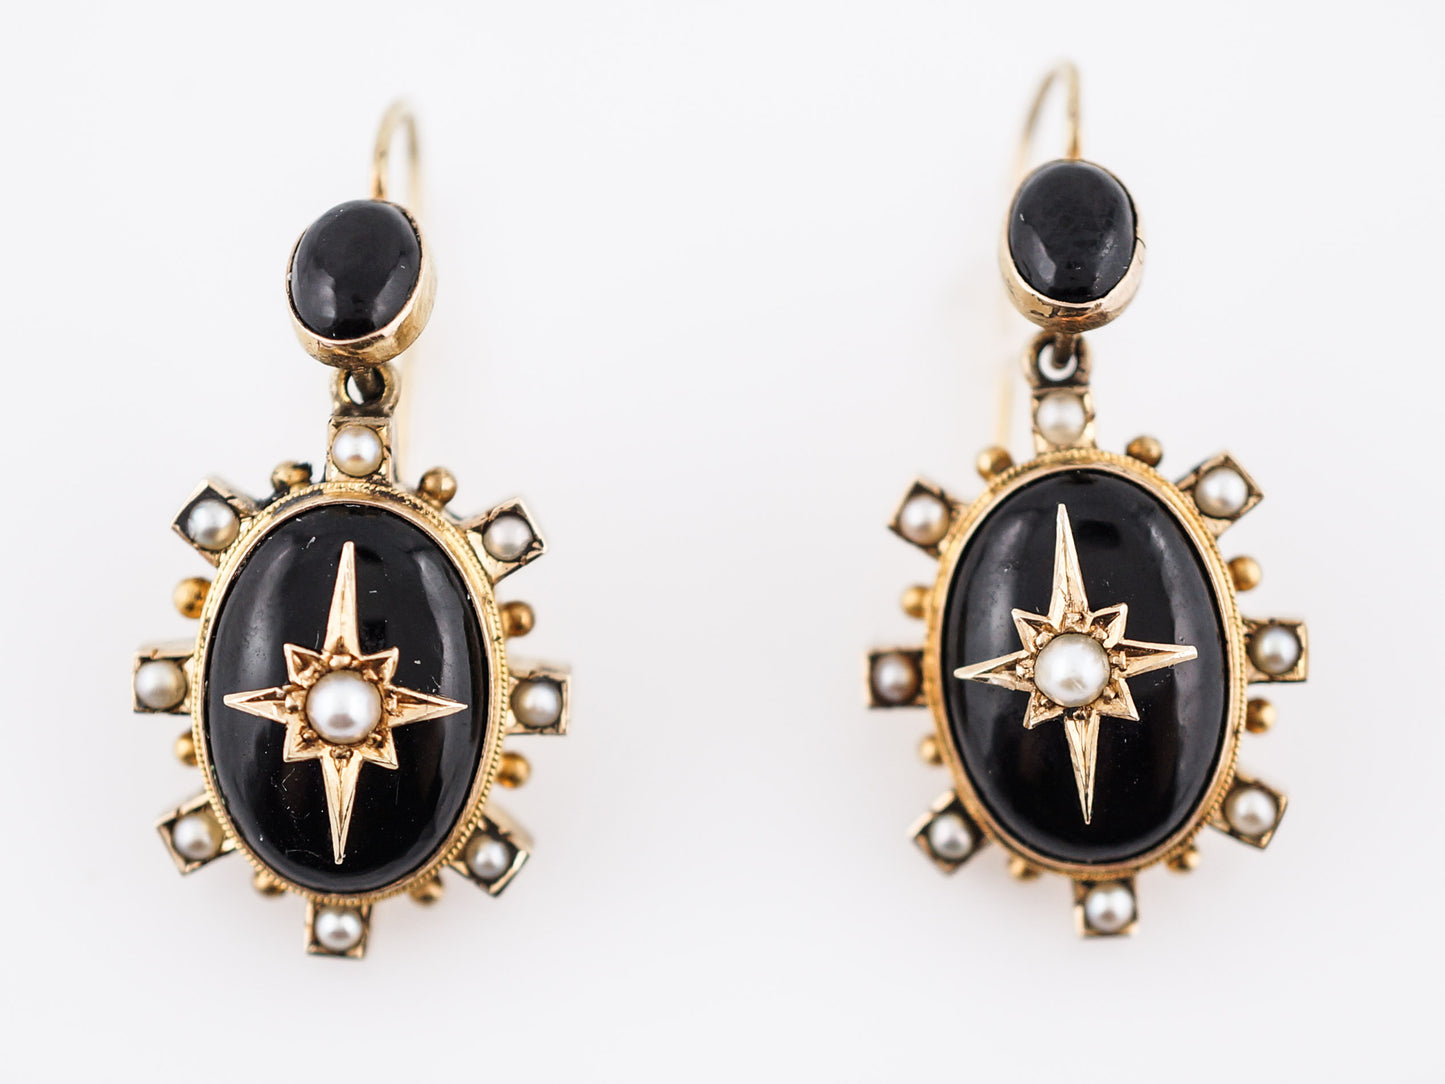 Antique Earrings Victorian Seed Pearl & Onyx in 15k Yellow Gold